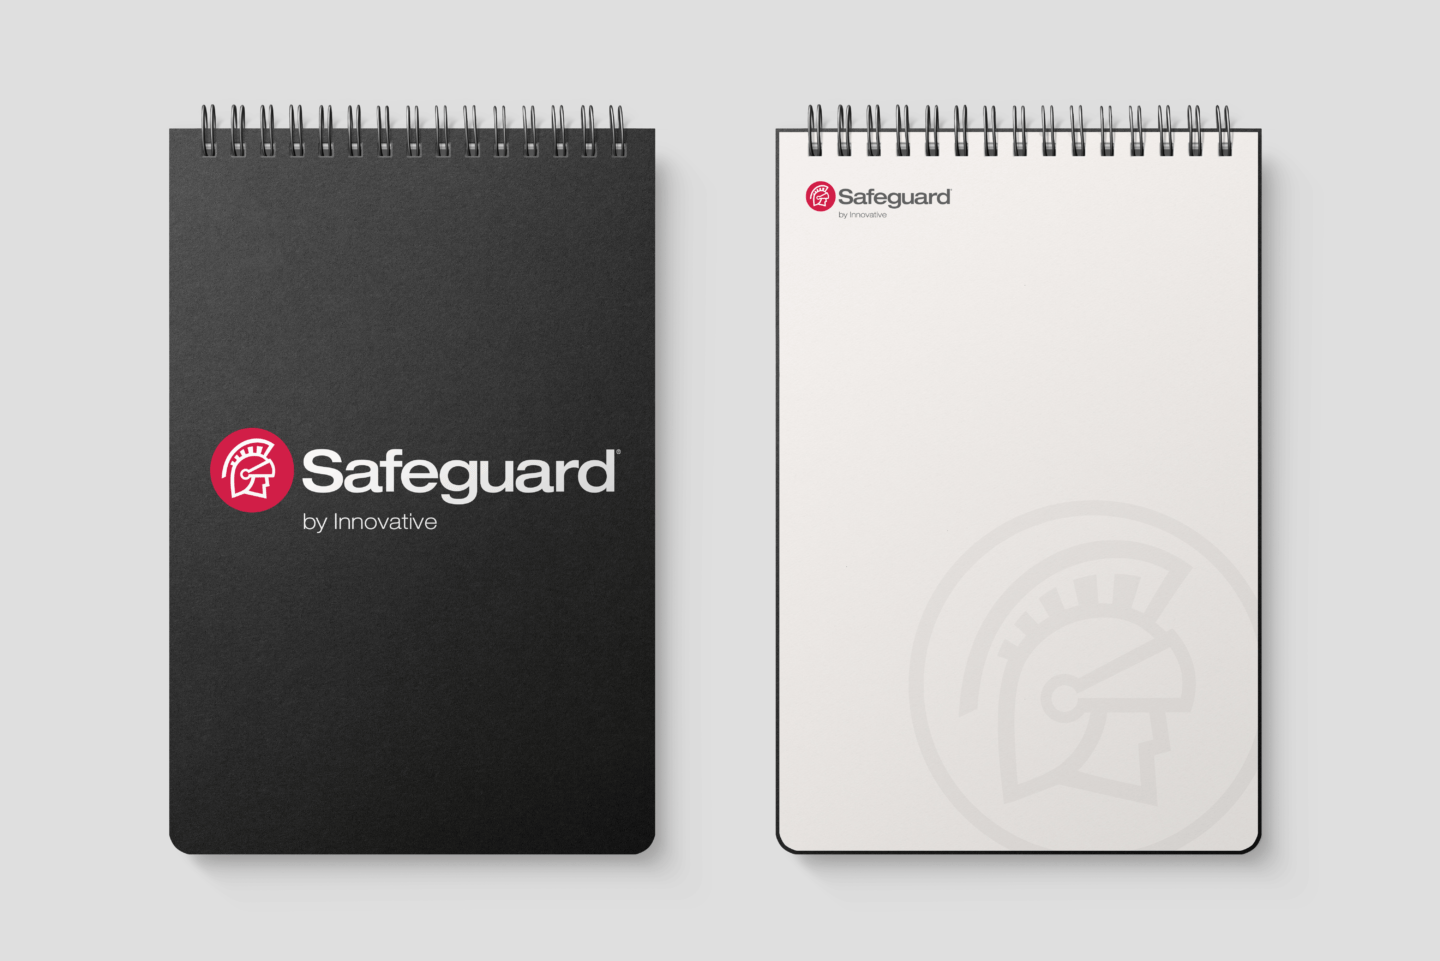 Two views of a Safeguard by Innovative notebook - one open and one closed.